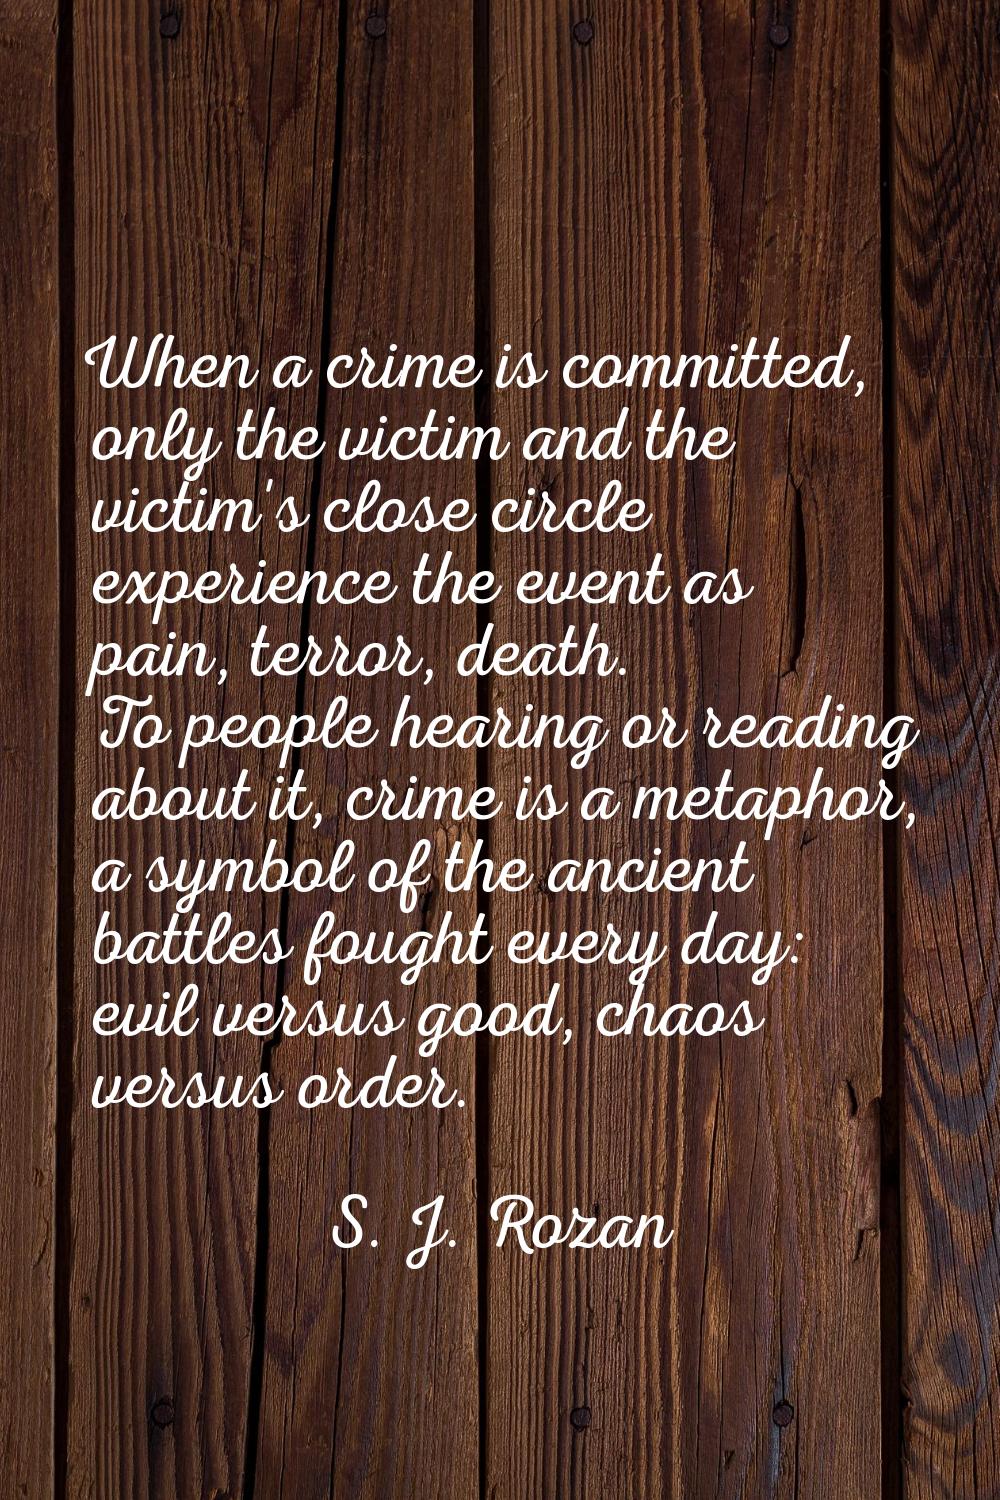 When a crime is committed, only the victim and the victim's close circle experience the event as pa